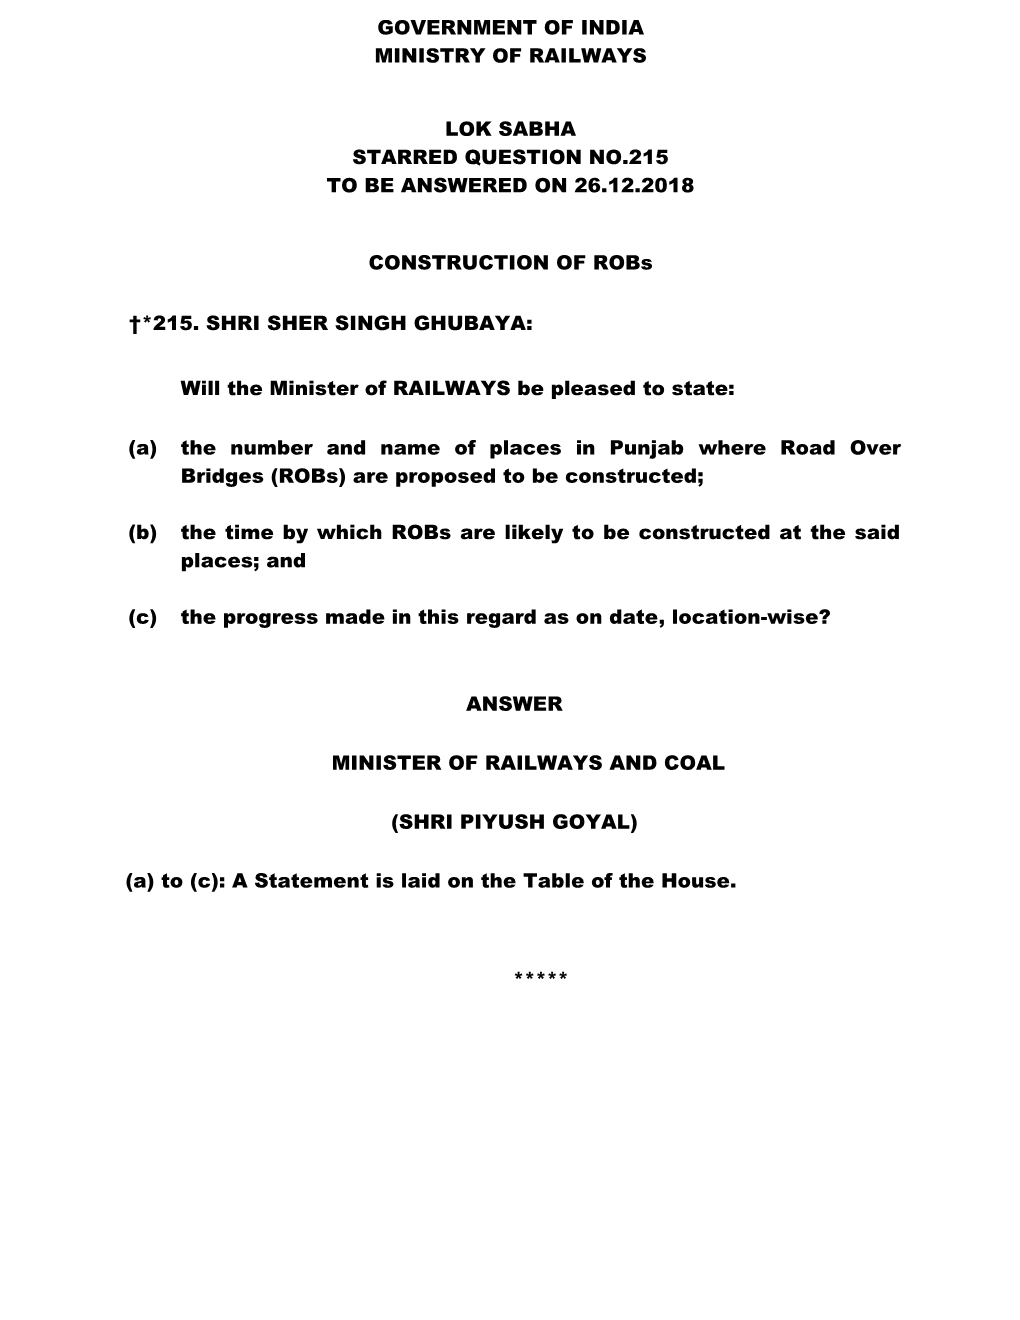 GOVERNMENT of INDIA MINISTRY of RAILWAYS LOK SABHA STARRED QUESTION NO.215 to BE ANSWERED on 26.12.2018 CONSTRUCTION of Robs †